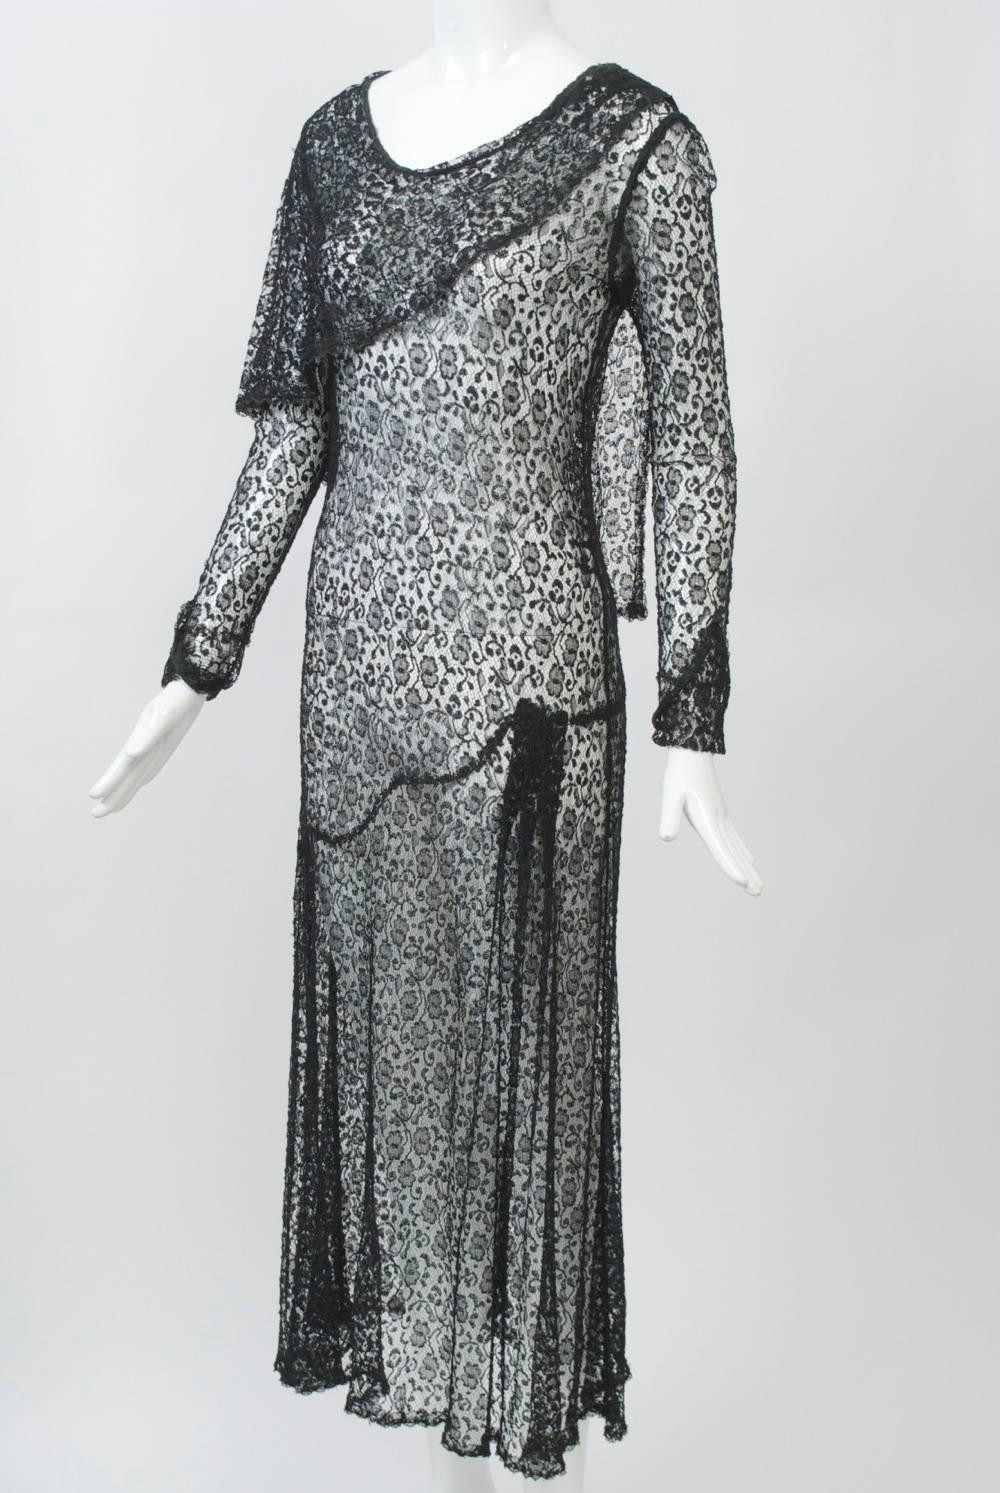 1930s Black Lace Tea Dress In Excellent Condition For Sale In Alford, MA